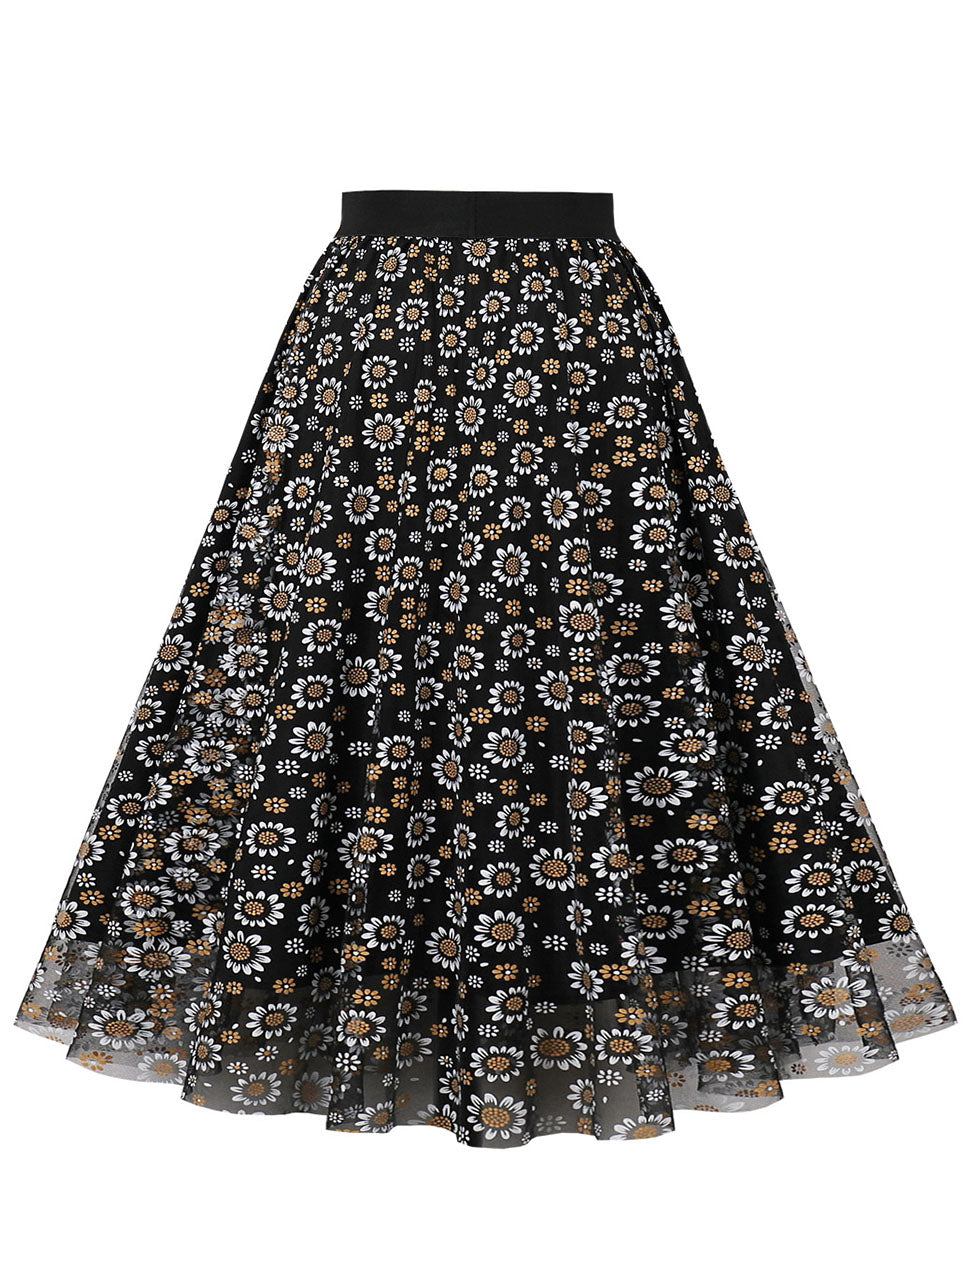 1950S Daisy Print High Wasit Pleated Swing Vintage Skirt